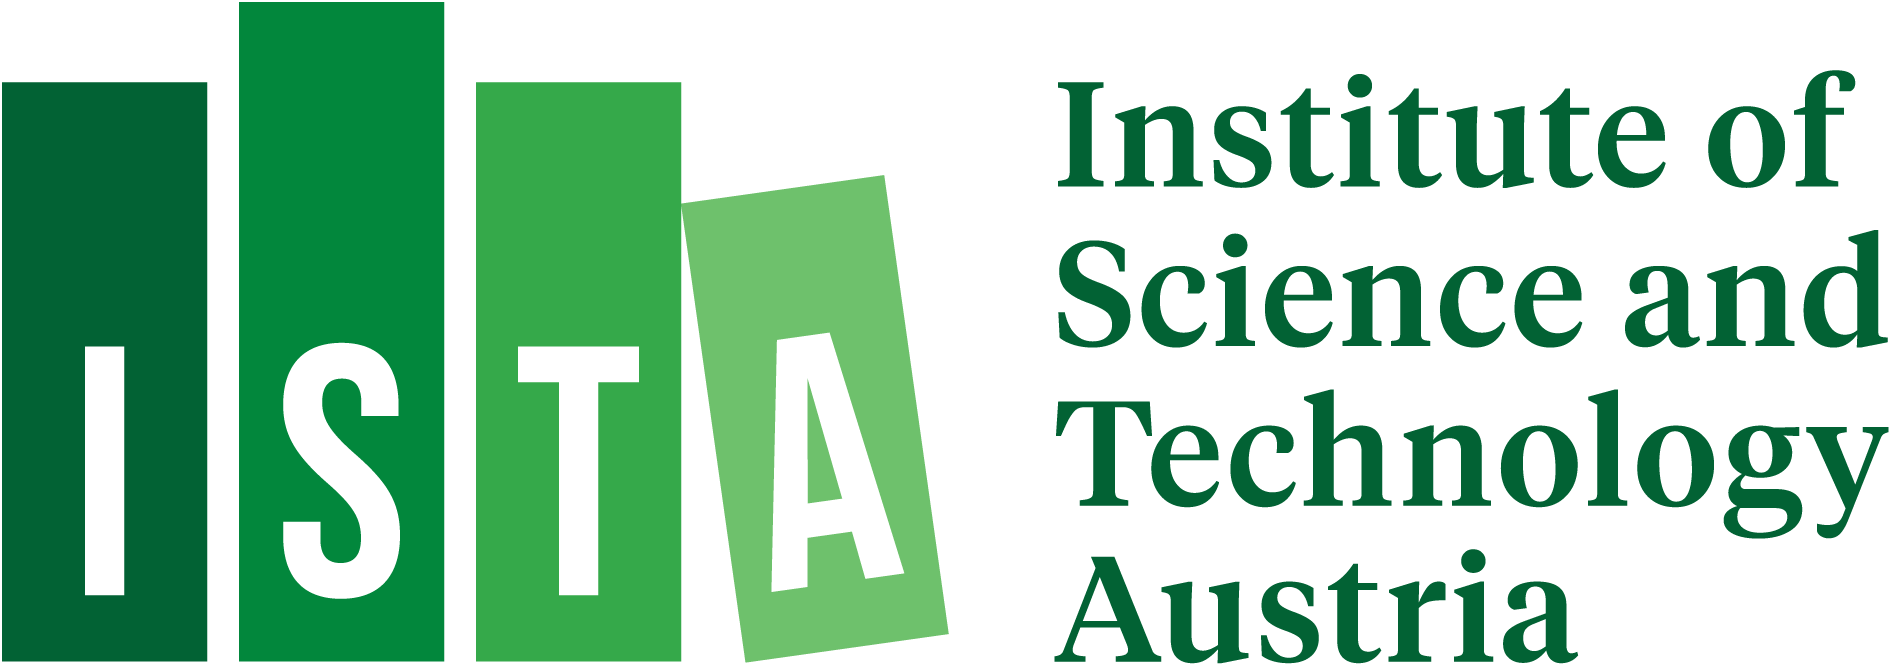 Insitute of Science and Technology Austria